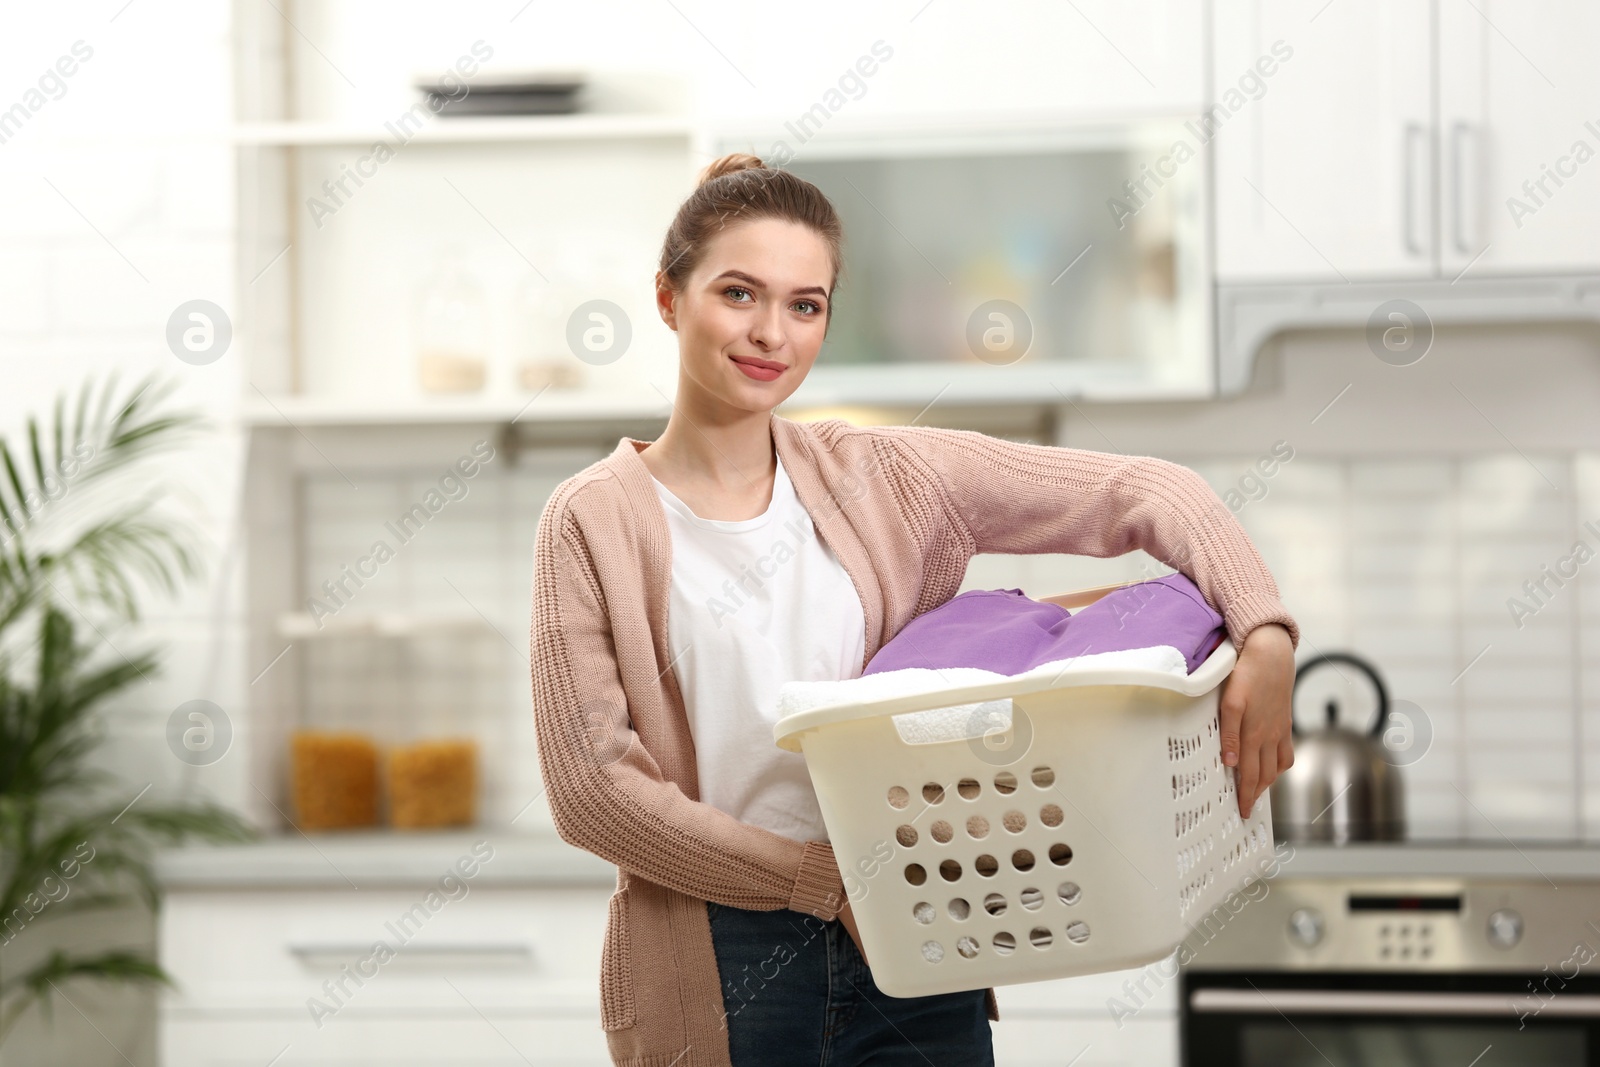 Photo of Woman holding basket with clean laundry in kitchen